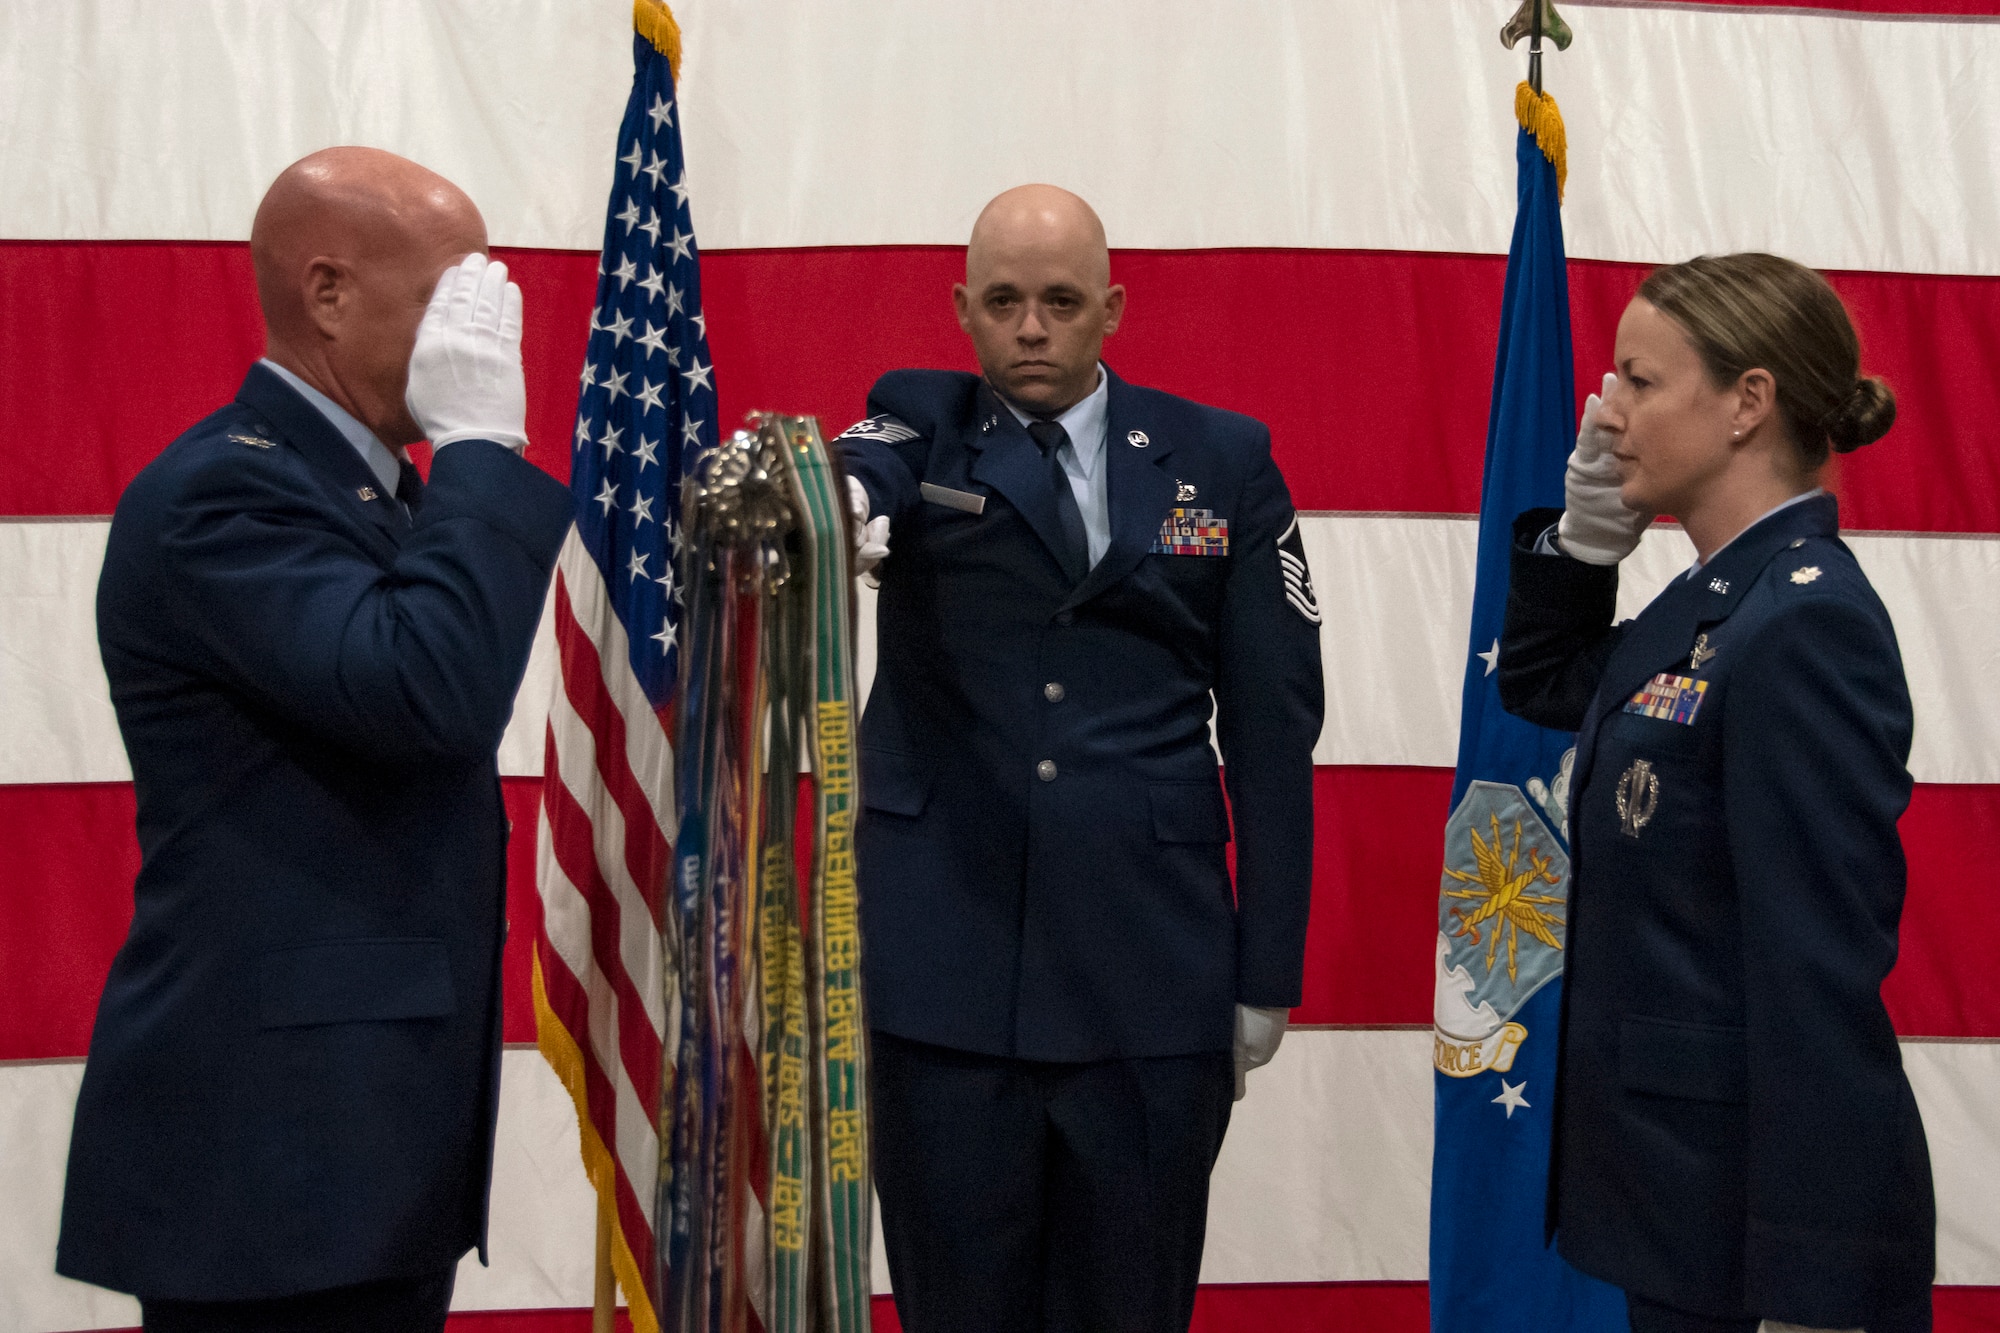 A man and woman salute each other while a third man extends out a flag straight out at should-length.